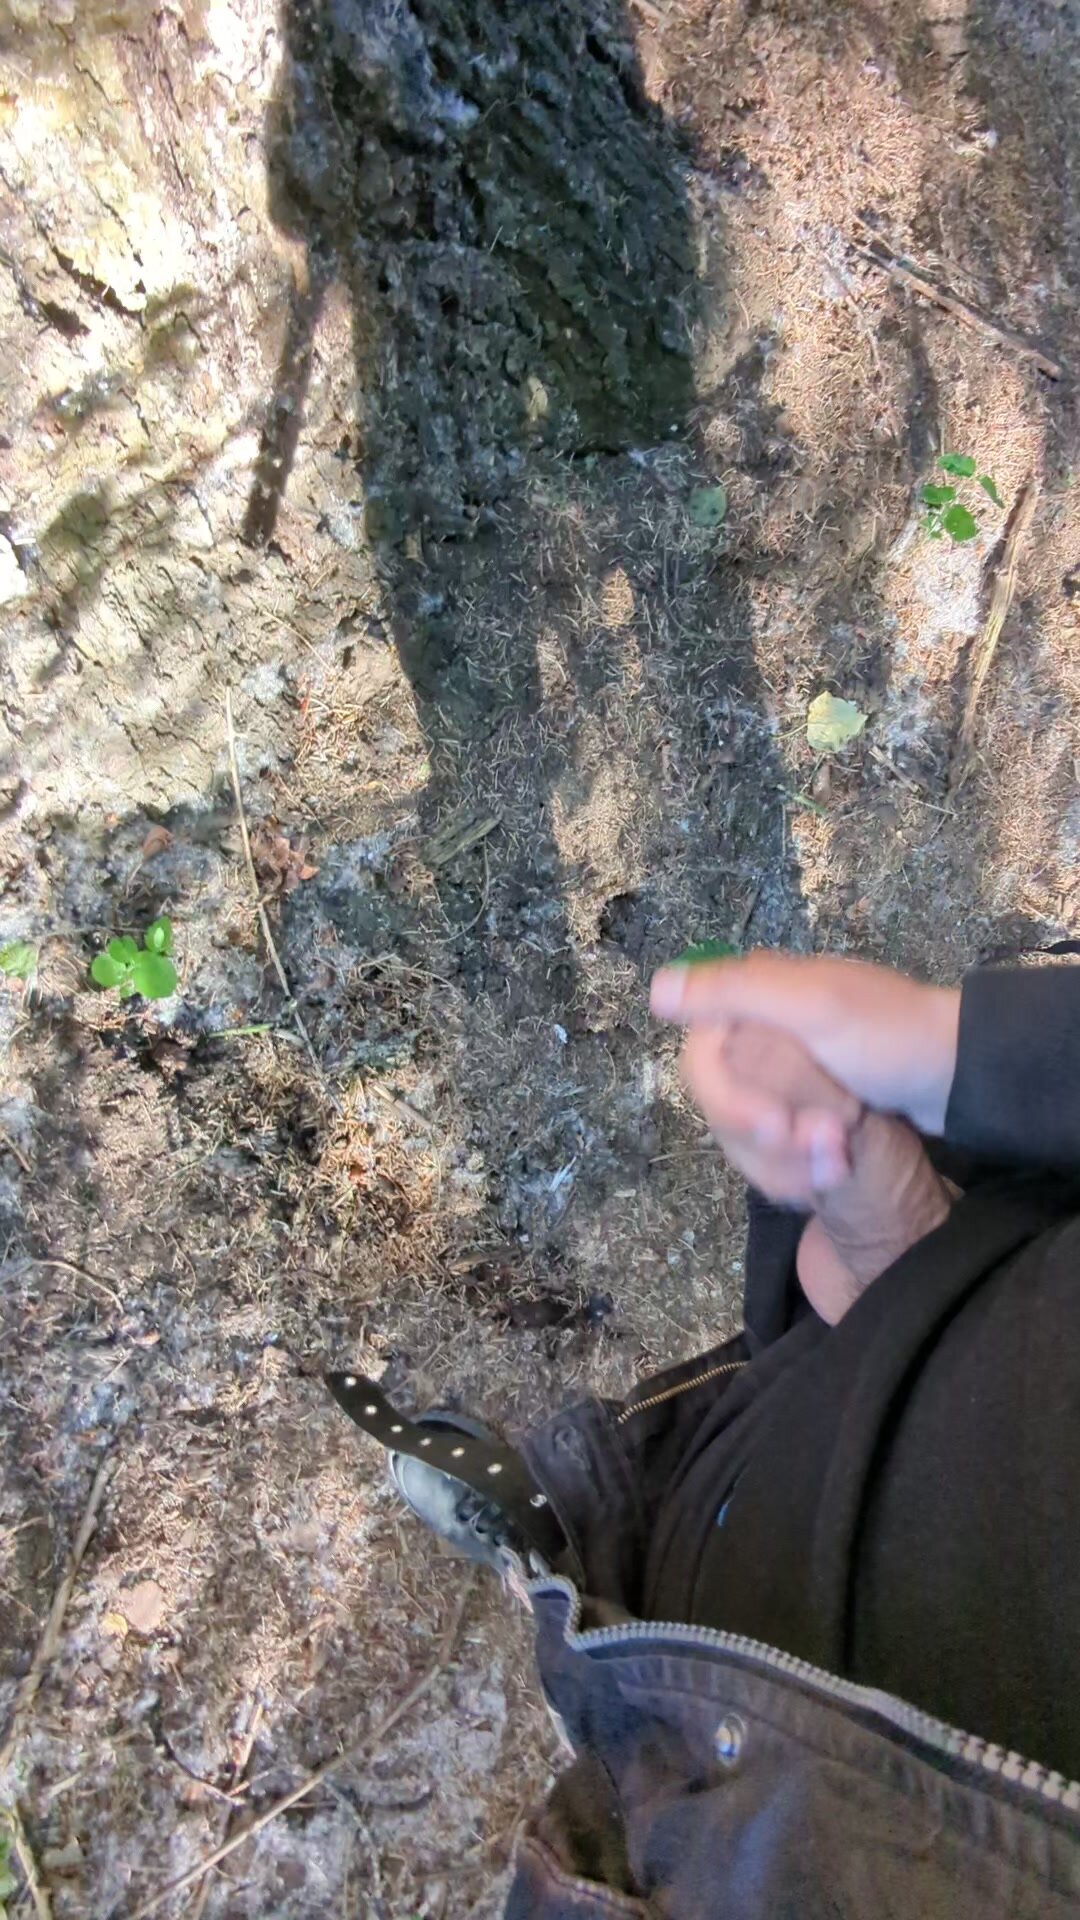 Quick vid me jerking in The Woods this summer